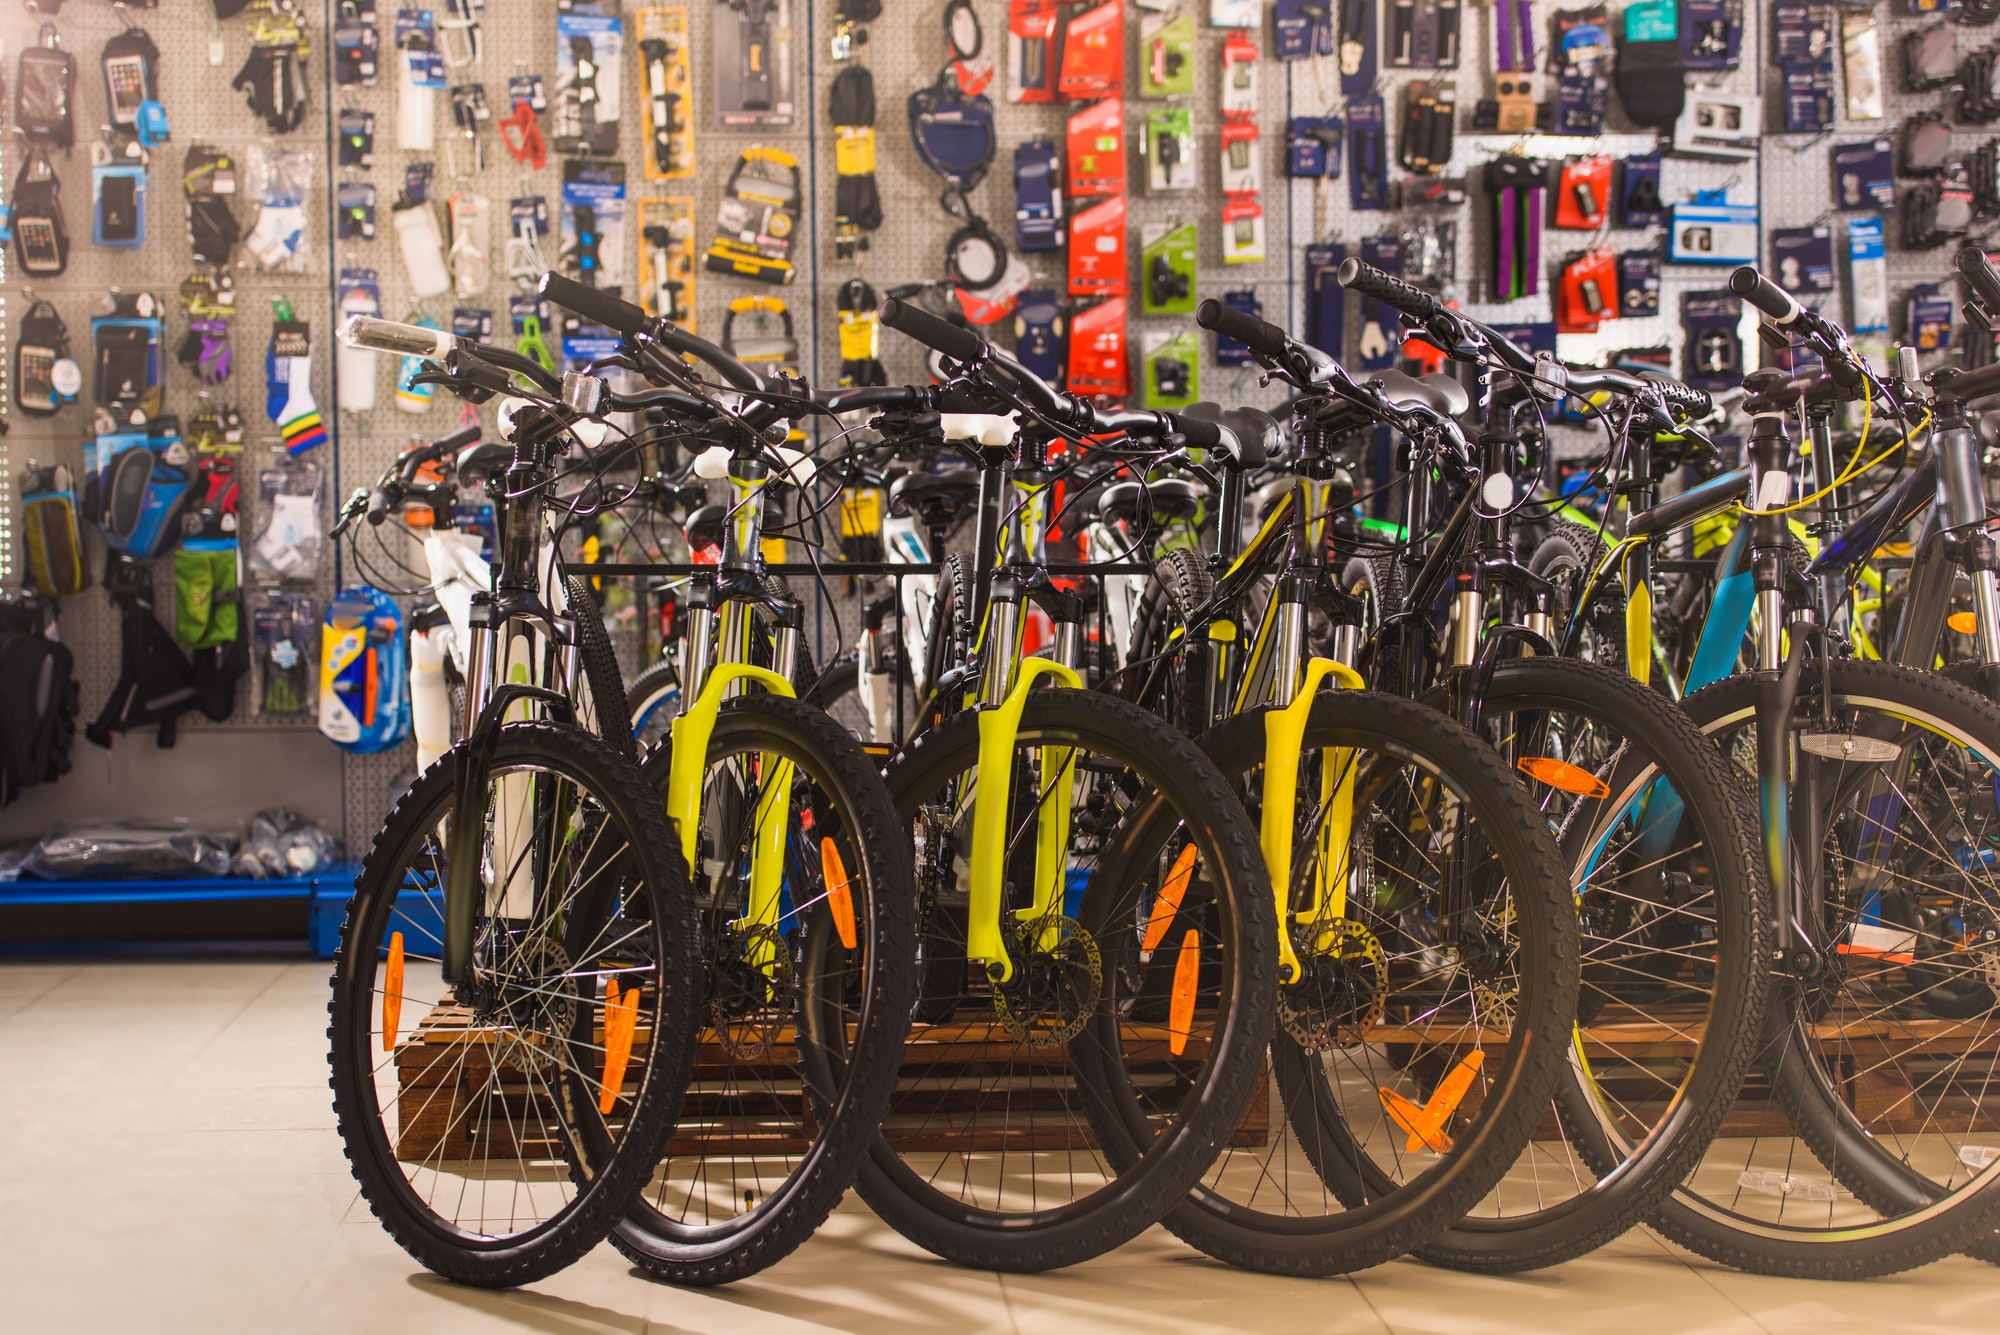 new modern bicycles selling in bike shop